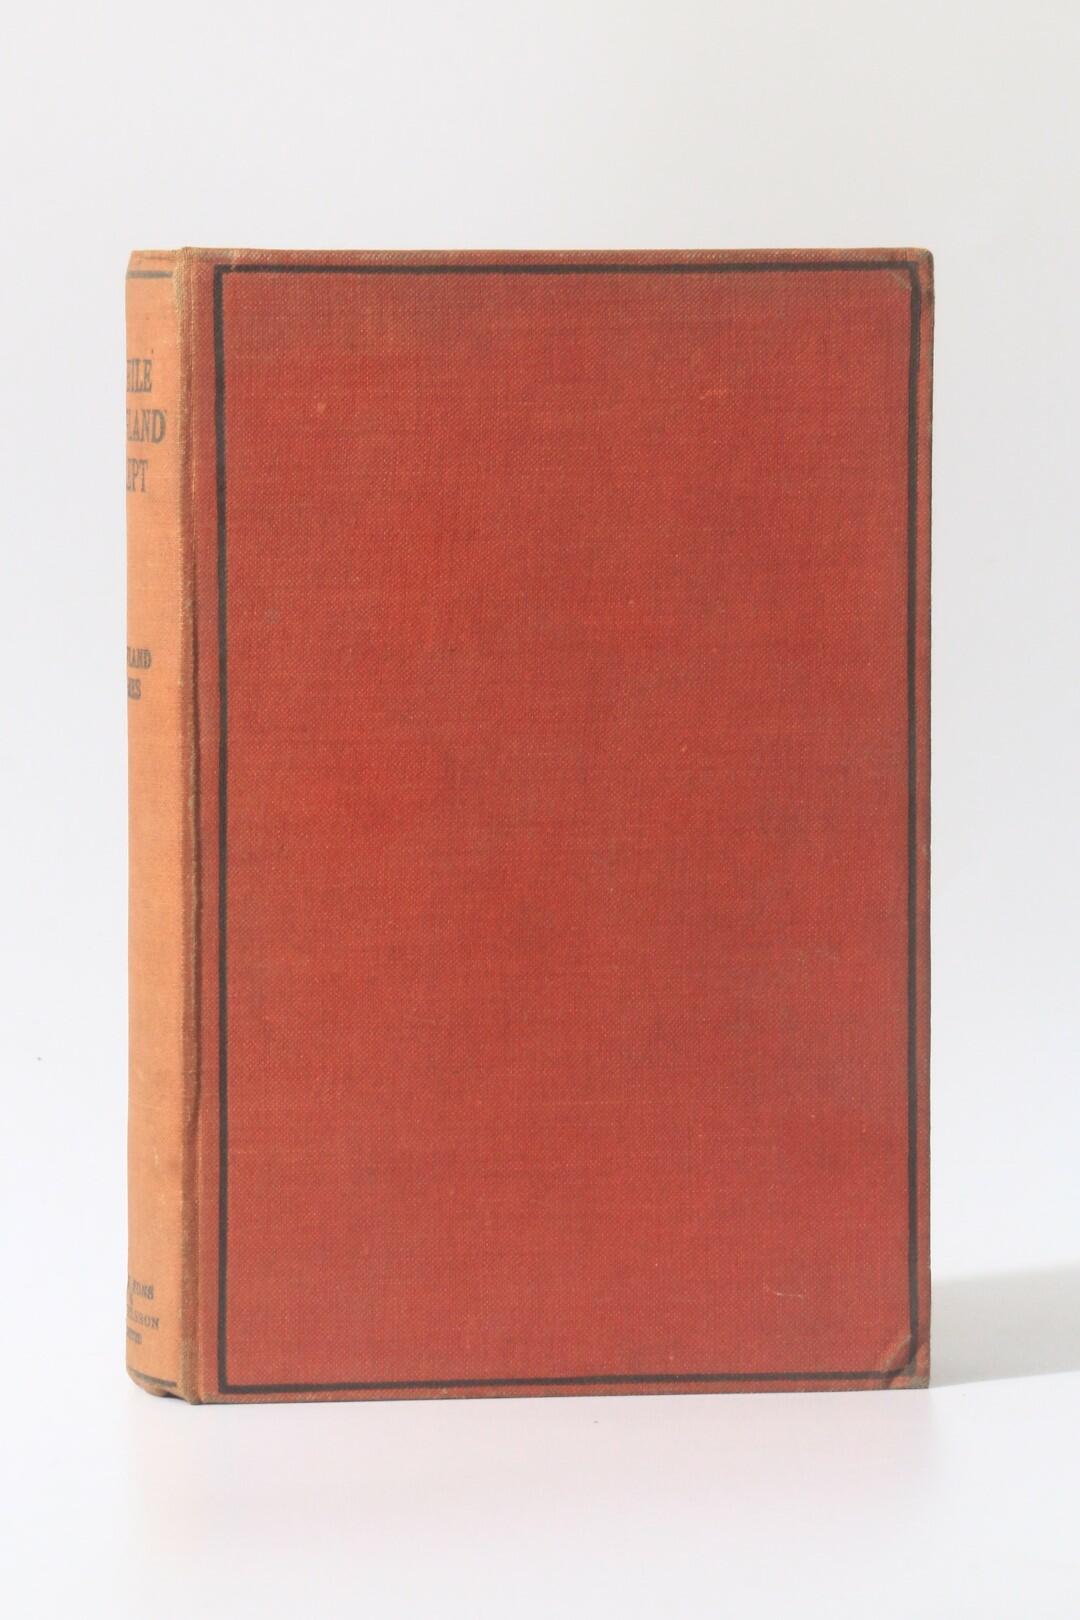 Rowland James - While England Slept - John Bale, Sons and Danielsson, 1932, Signed First Edition.